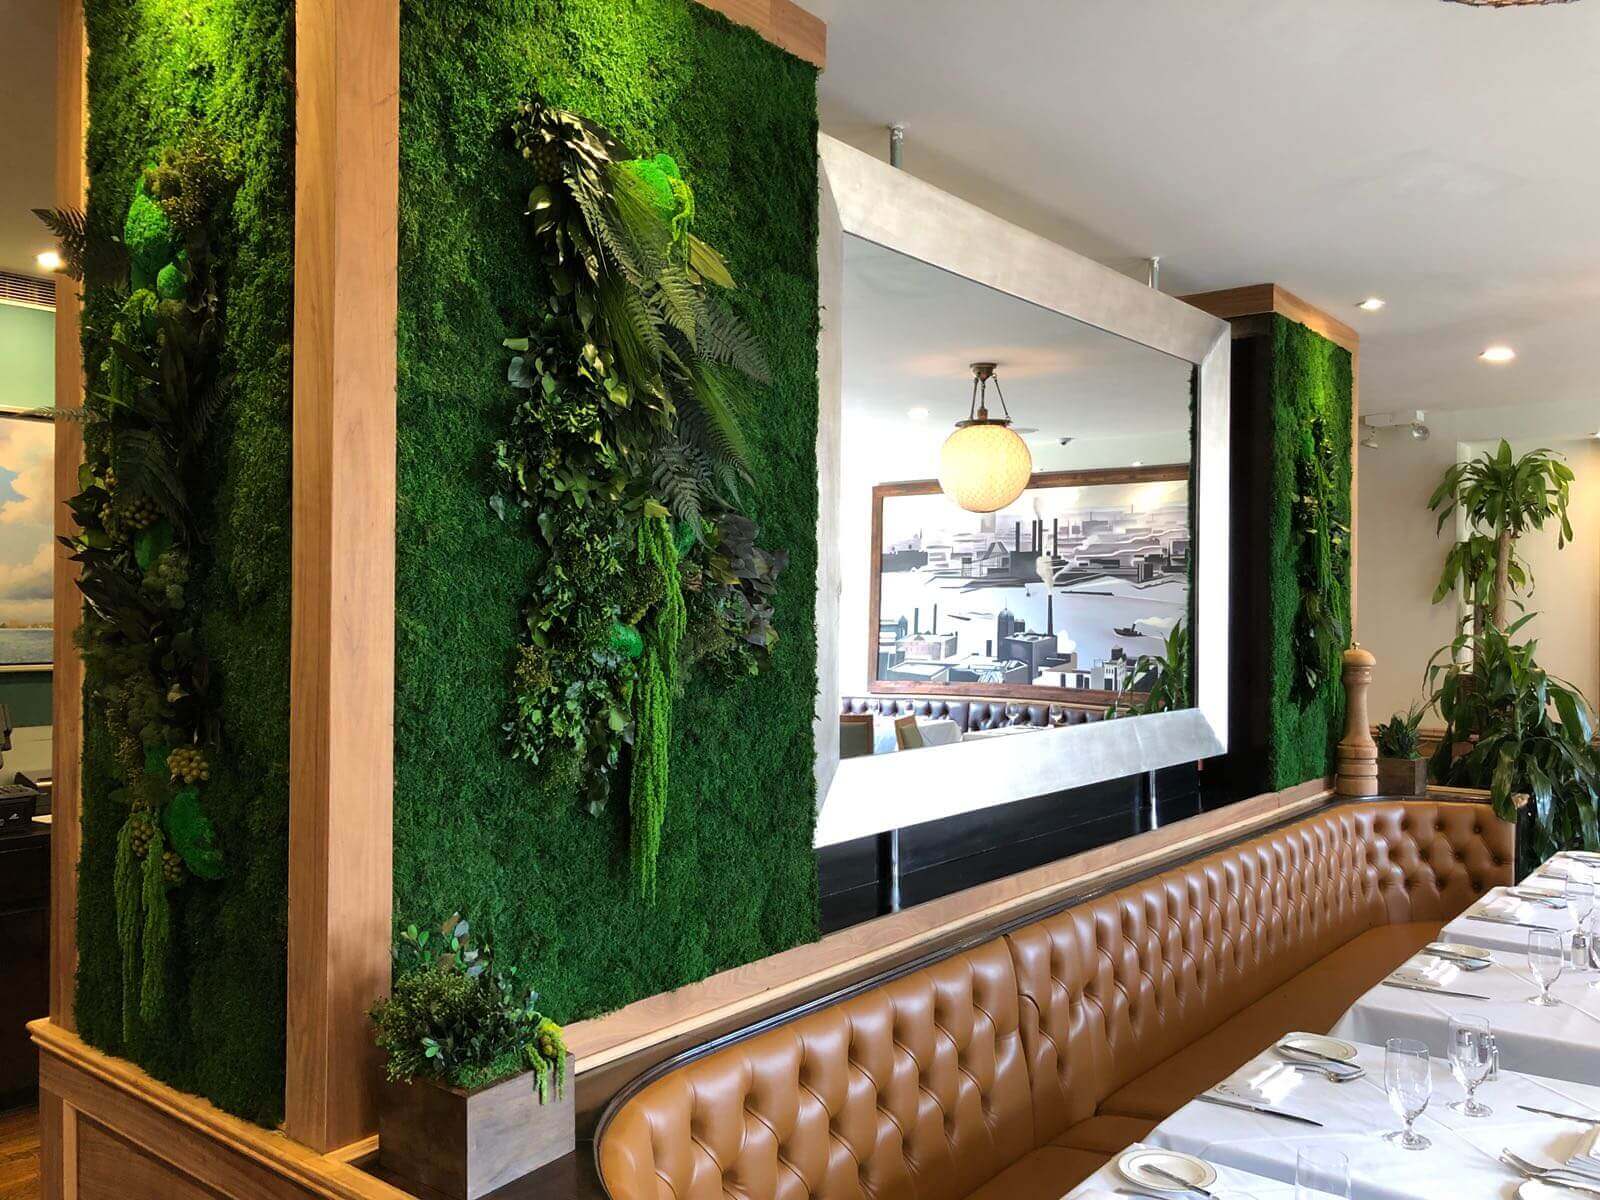 What Are The Most Important Things That You Should Know About The Preserved Green Walls Services?